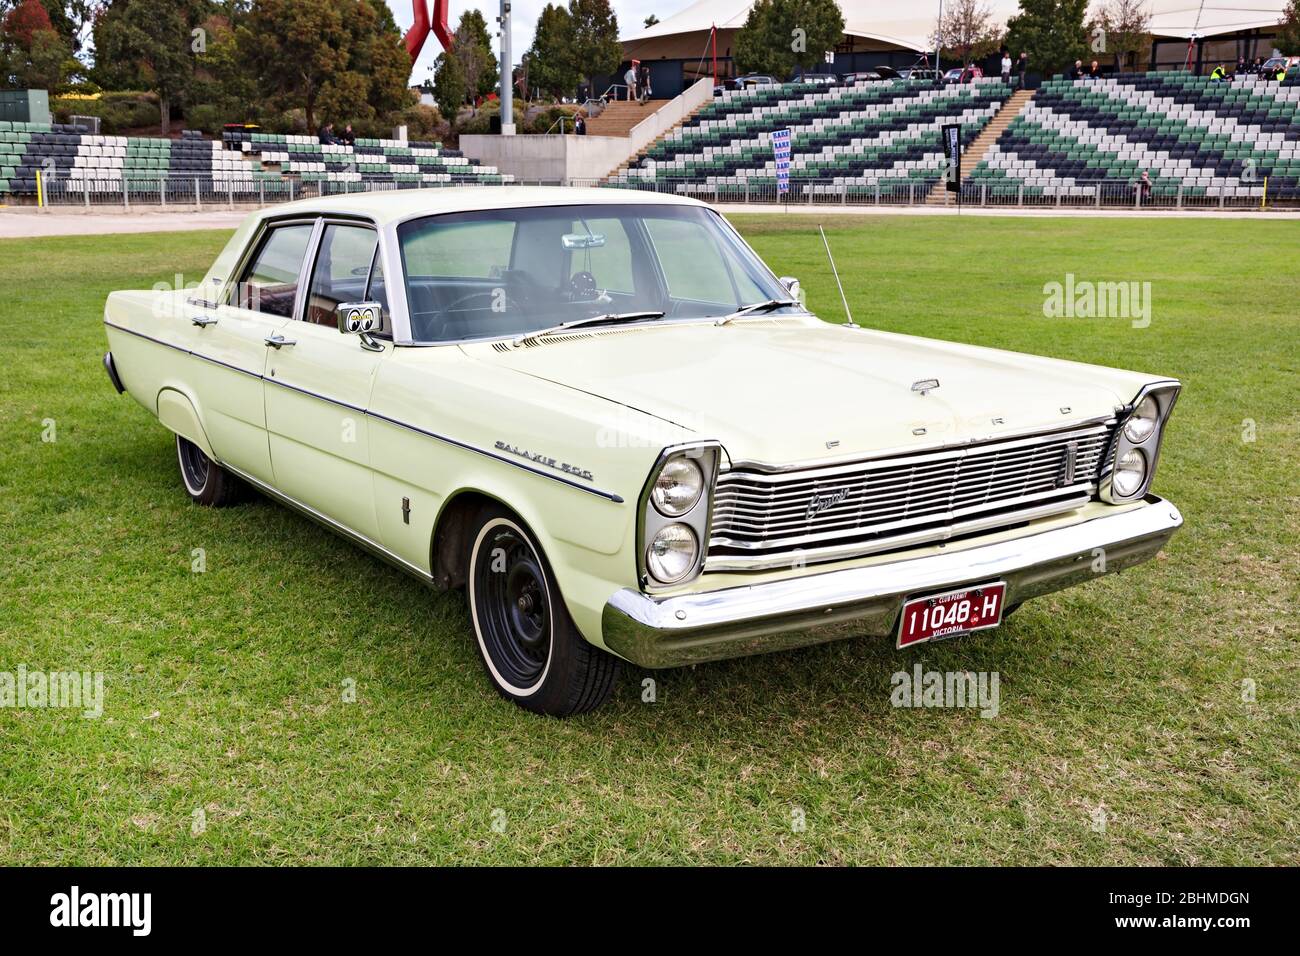 Automobiles /  Australian made 1965 Ford Galaxie displayed at a motor show in Melbourne Victoria Australia. Stock Photo